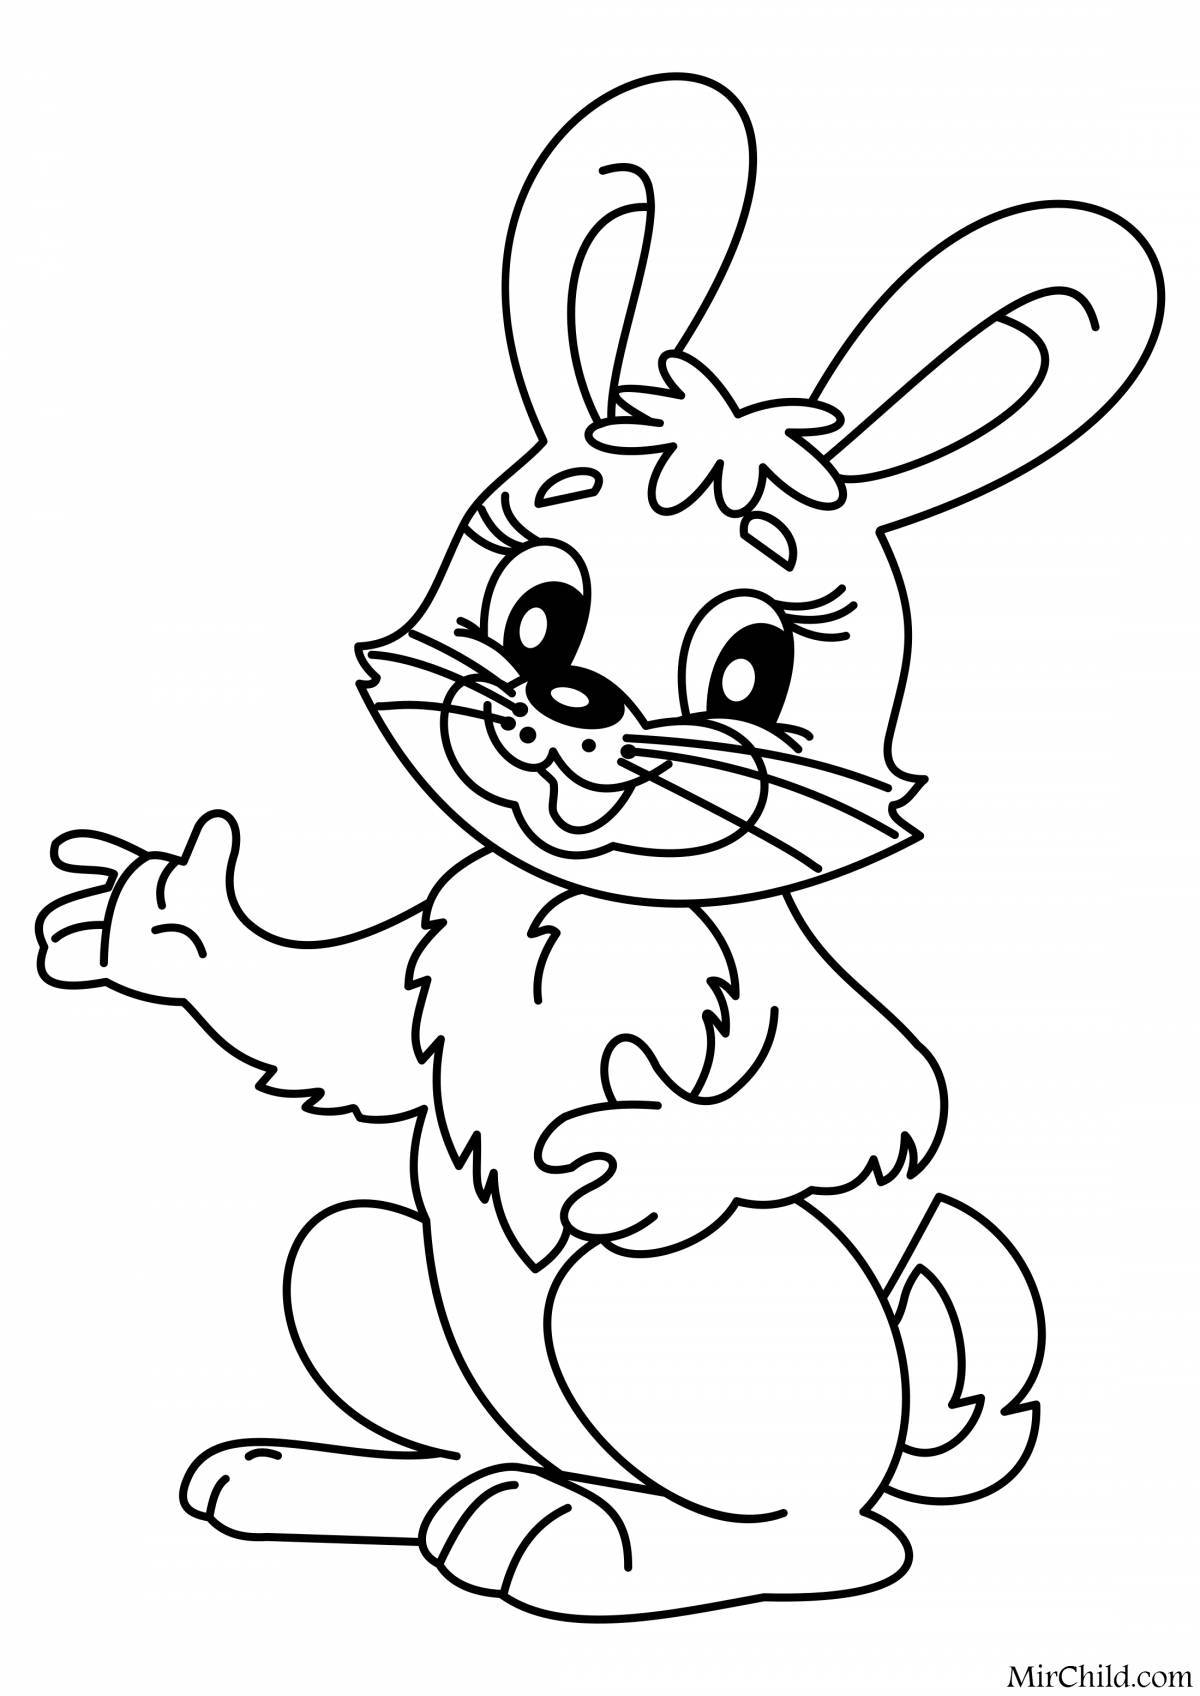 Joyful coloring hare picture for children